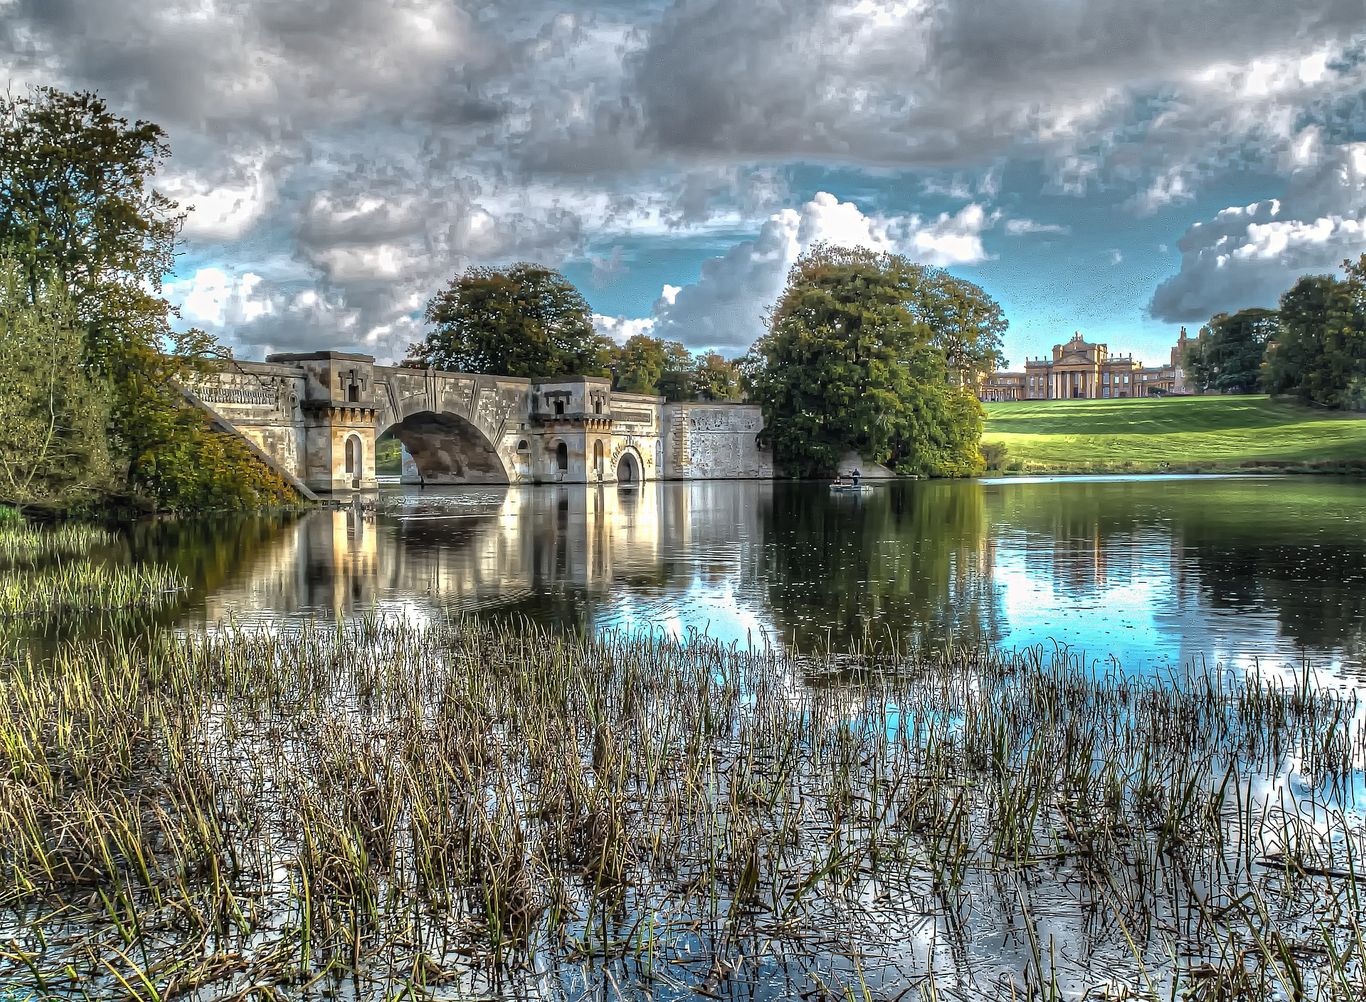 Blenheim Palace and the Pleasure Gardens